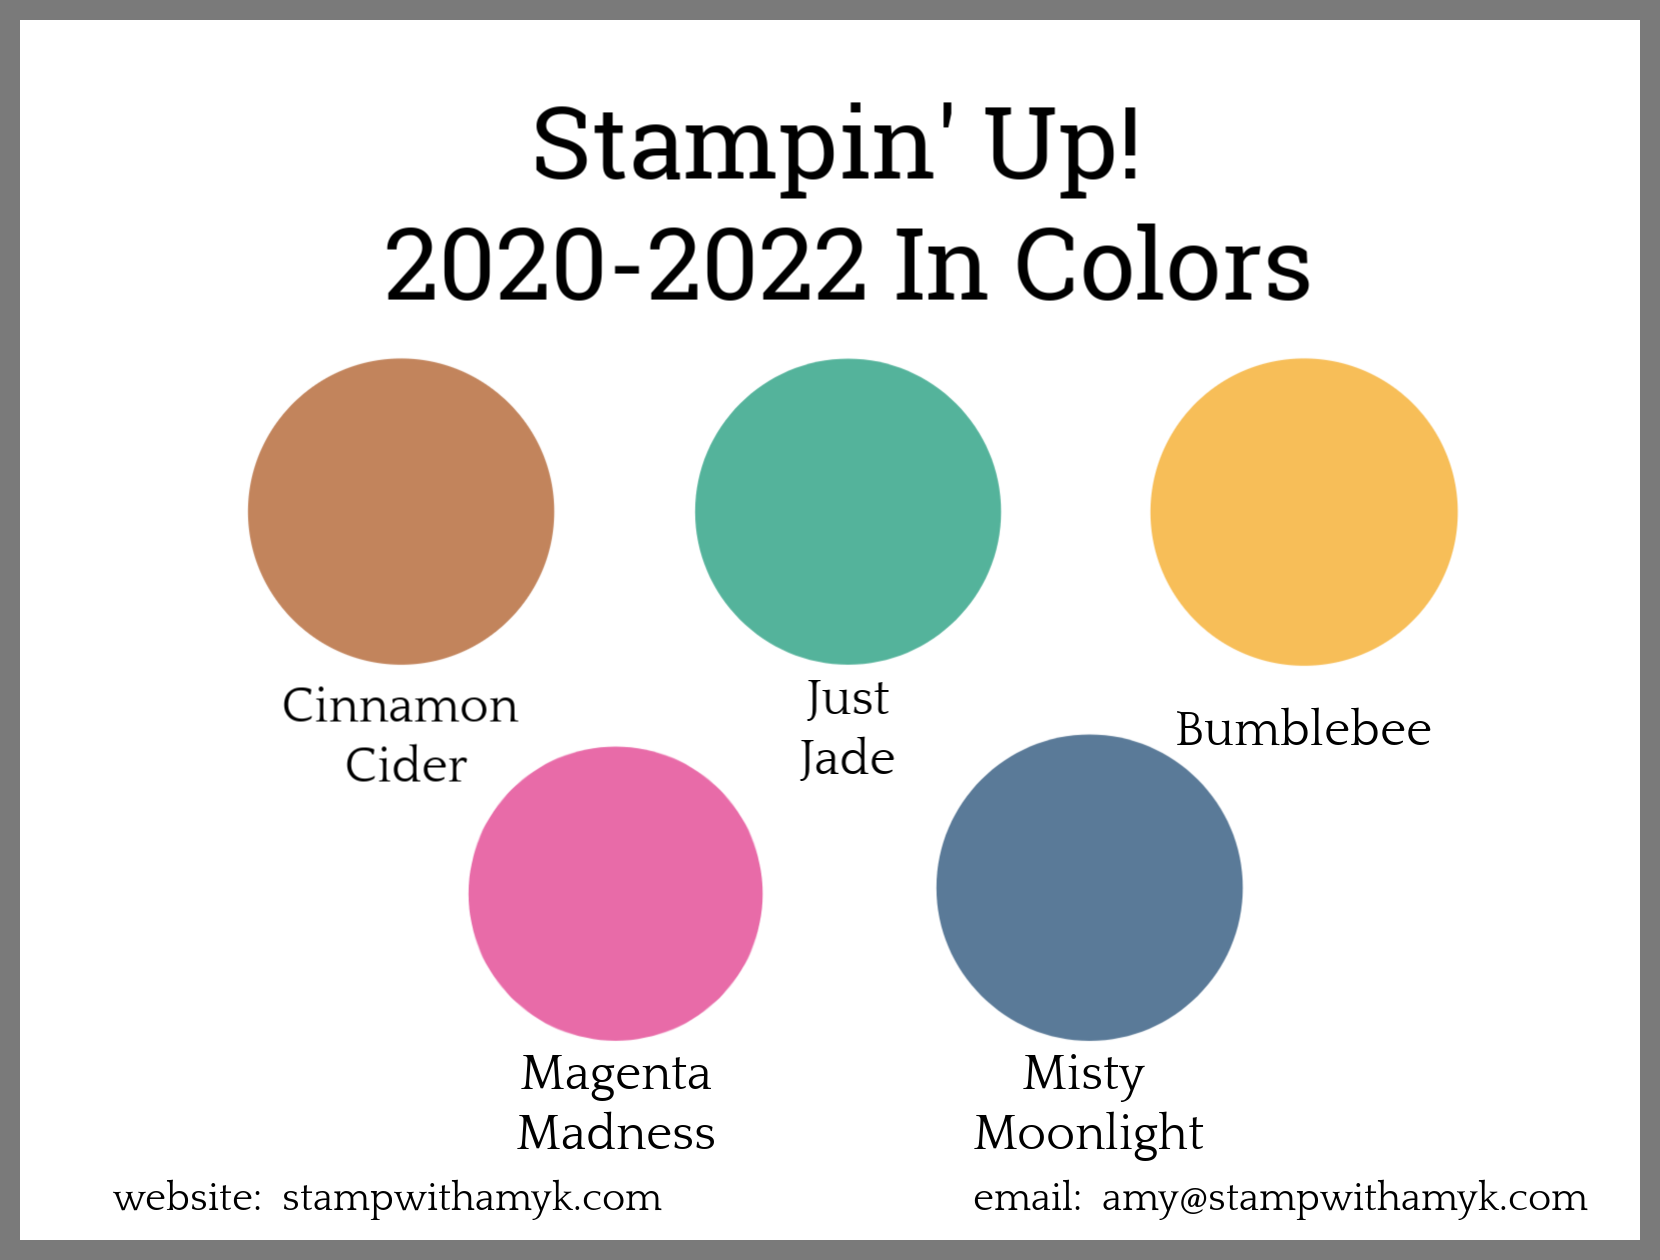 Stampin’ Up! 20202022 In Colors & Color Coach! Stamp With Amy K